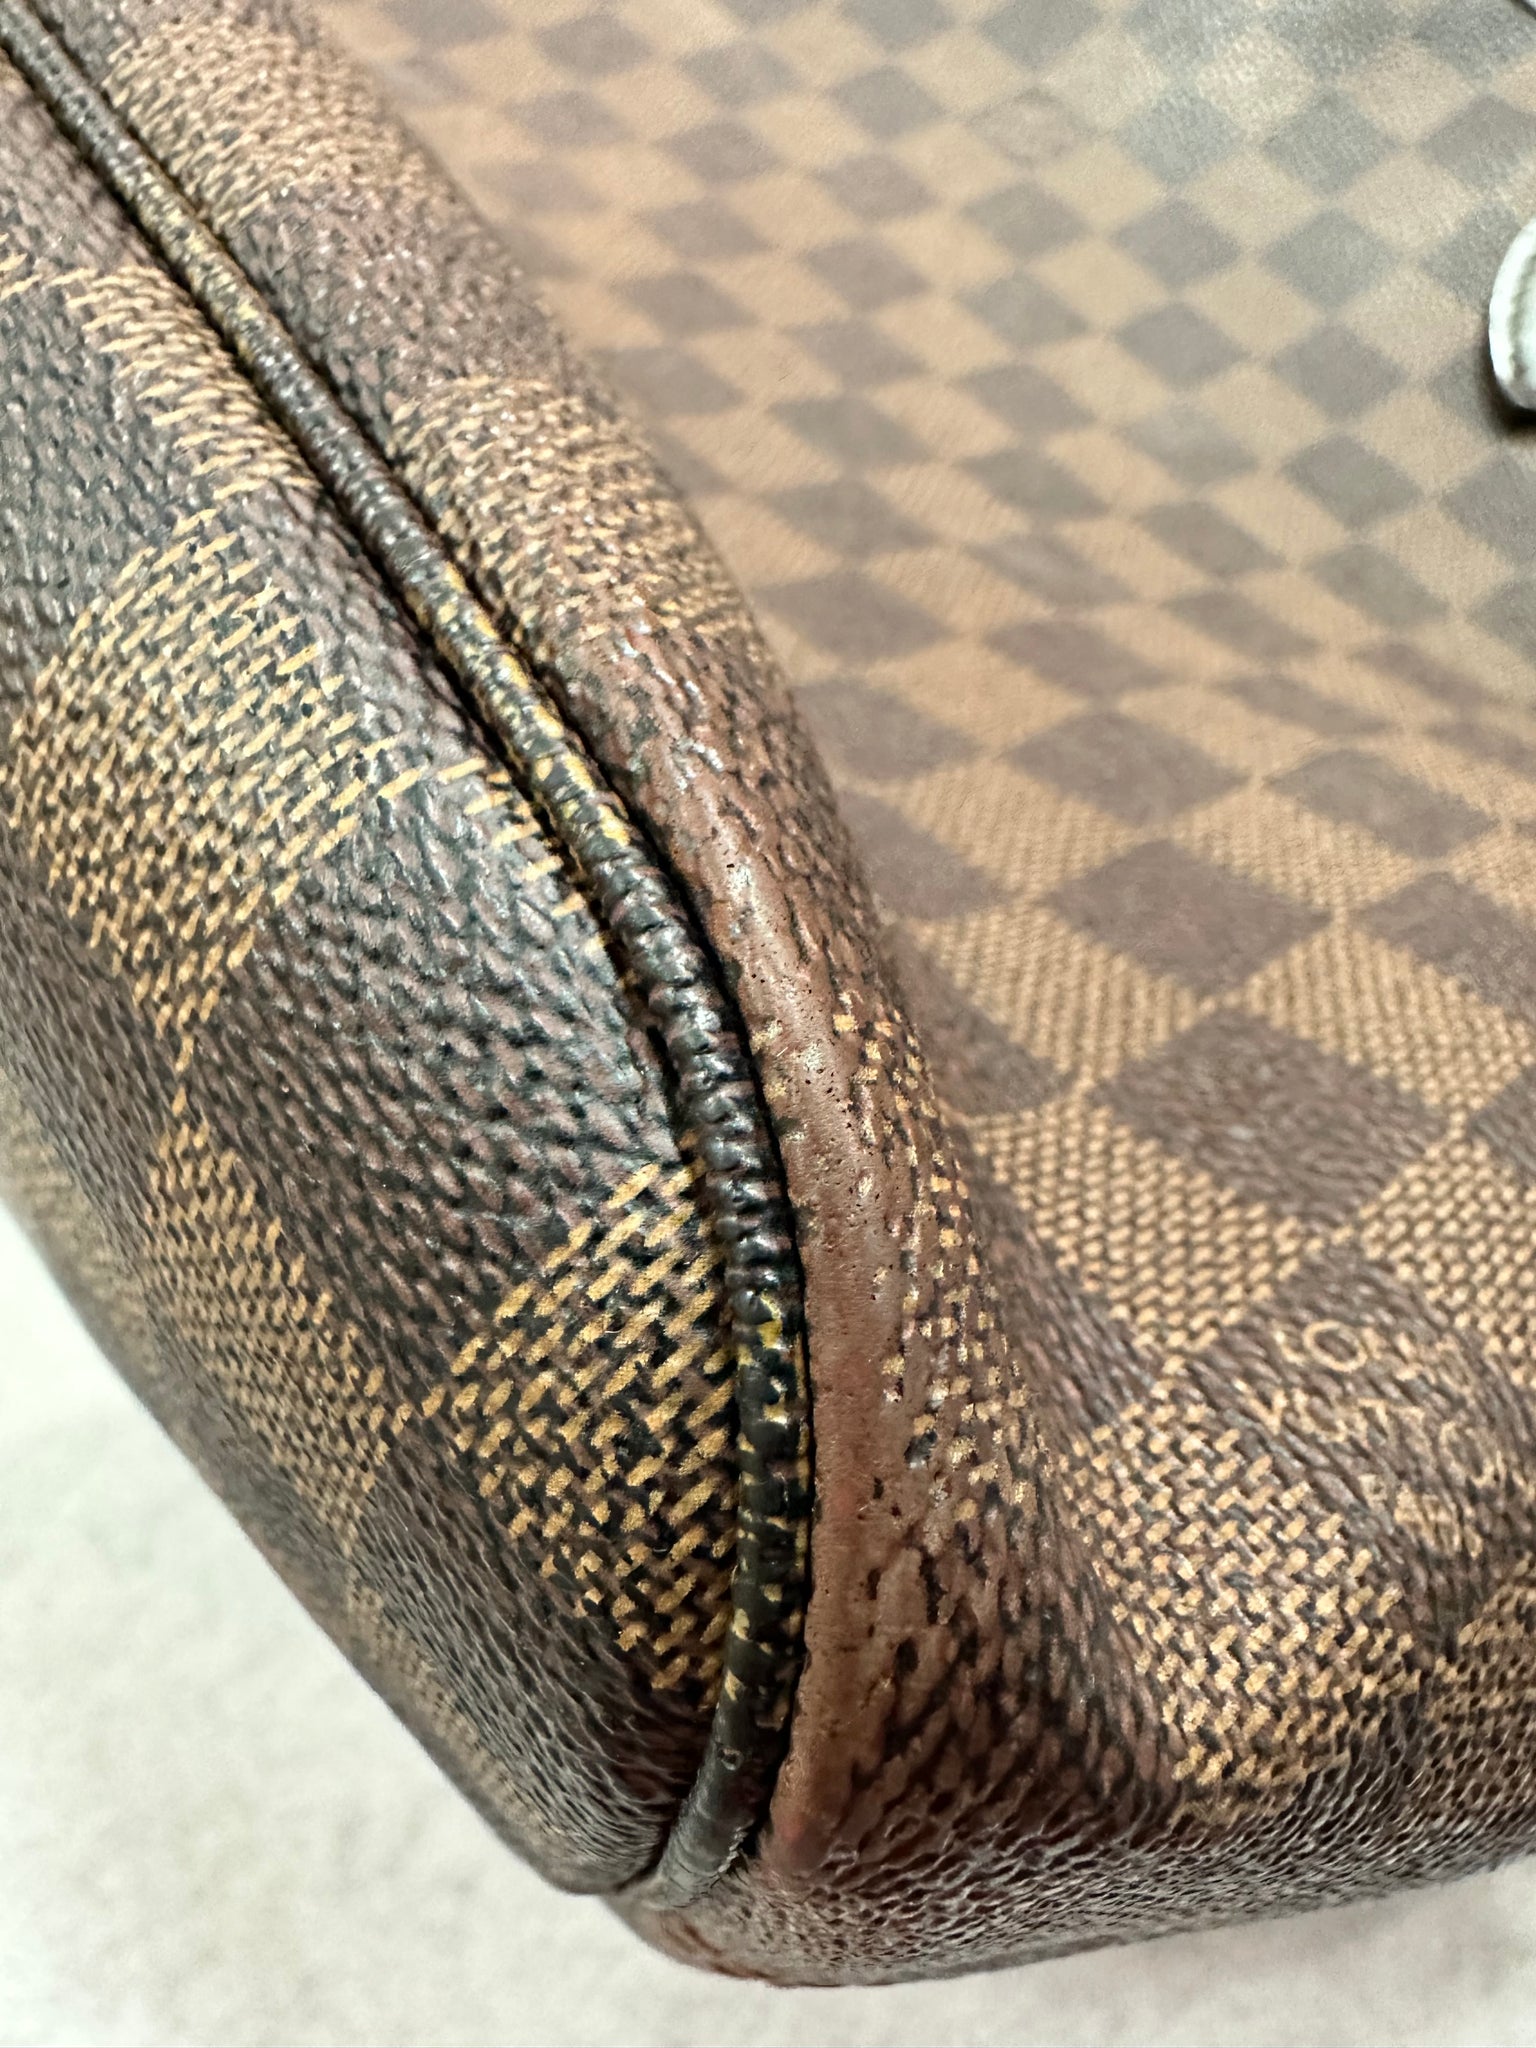 Louis Vuitton Brown Damier Ebene Coated Canvas Neverfull MM Gold